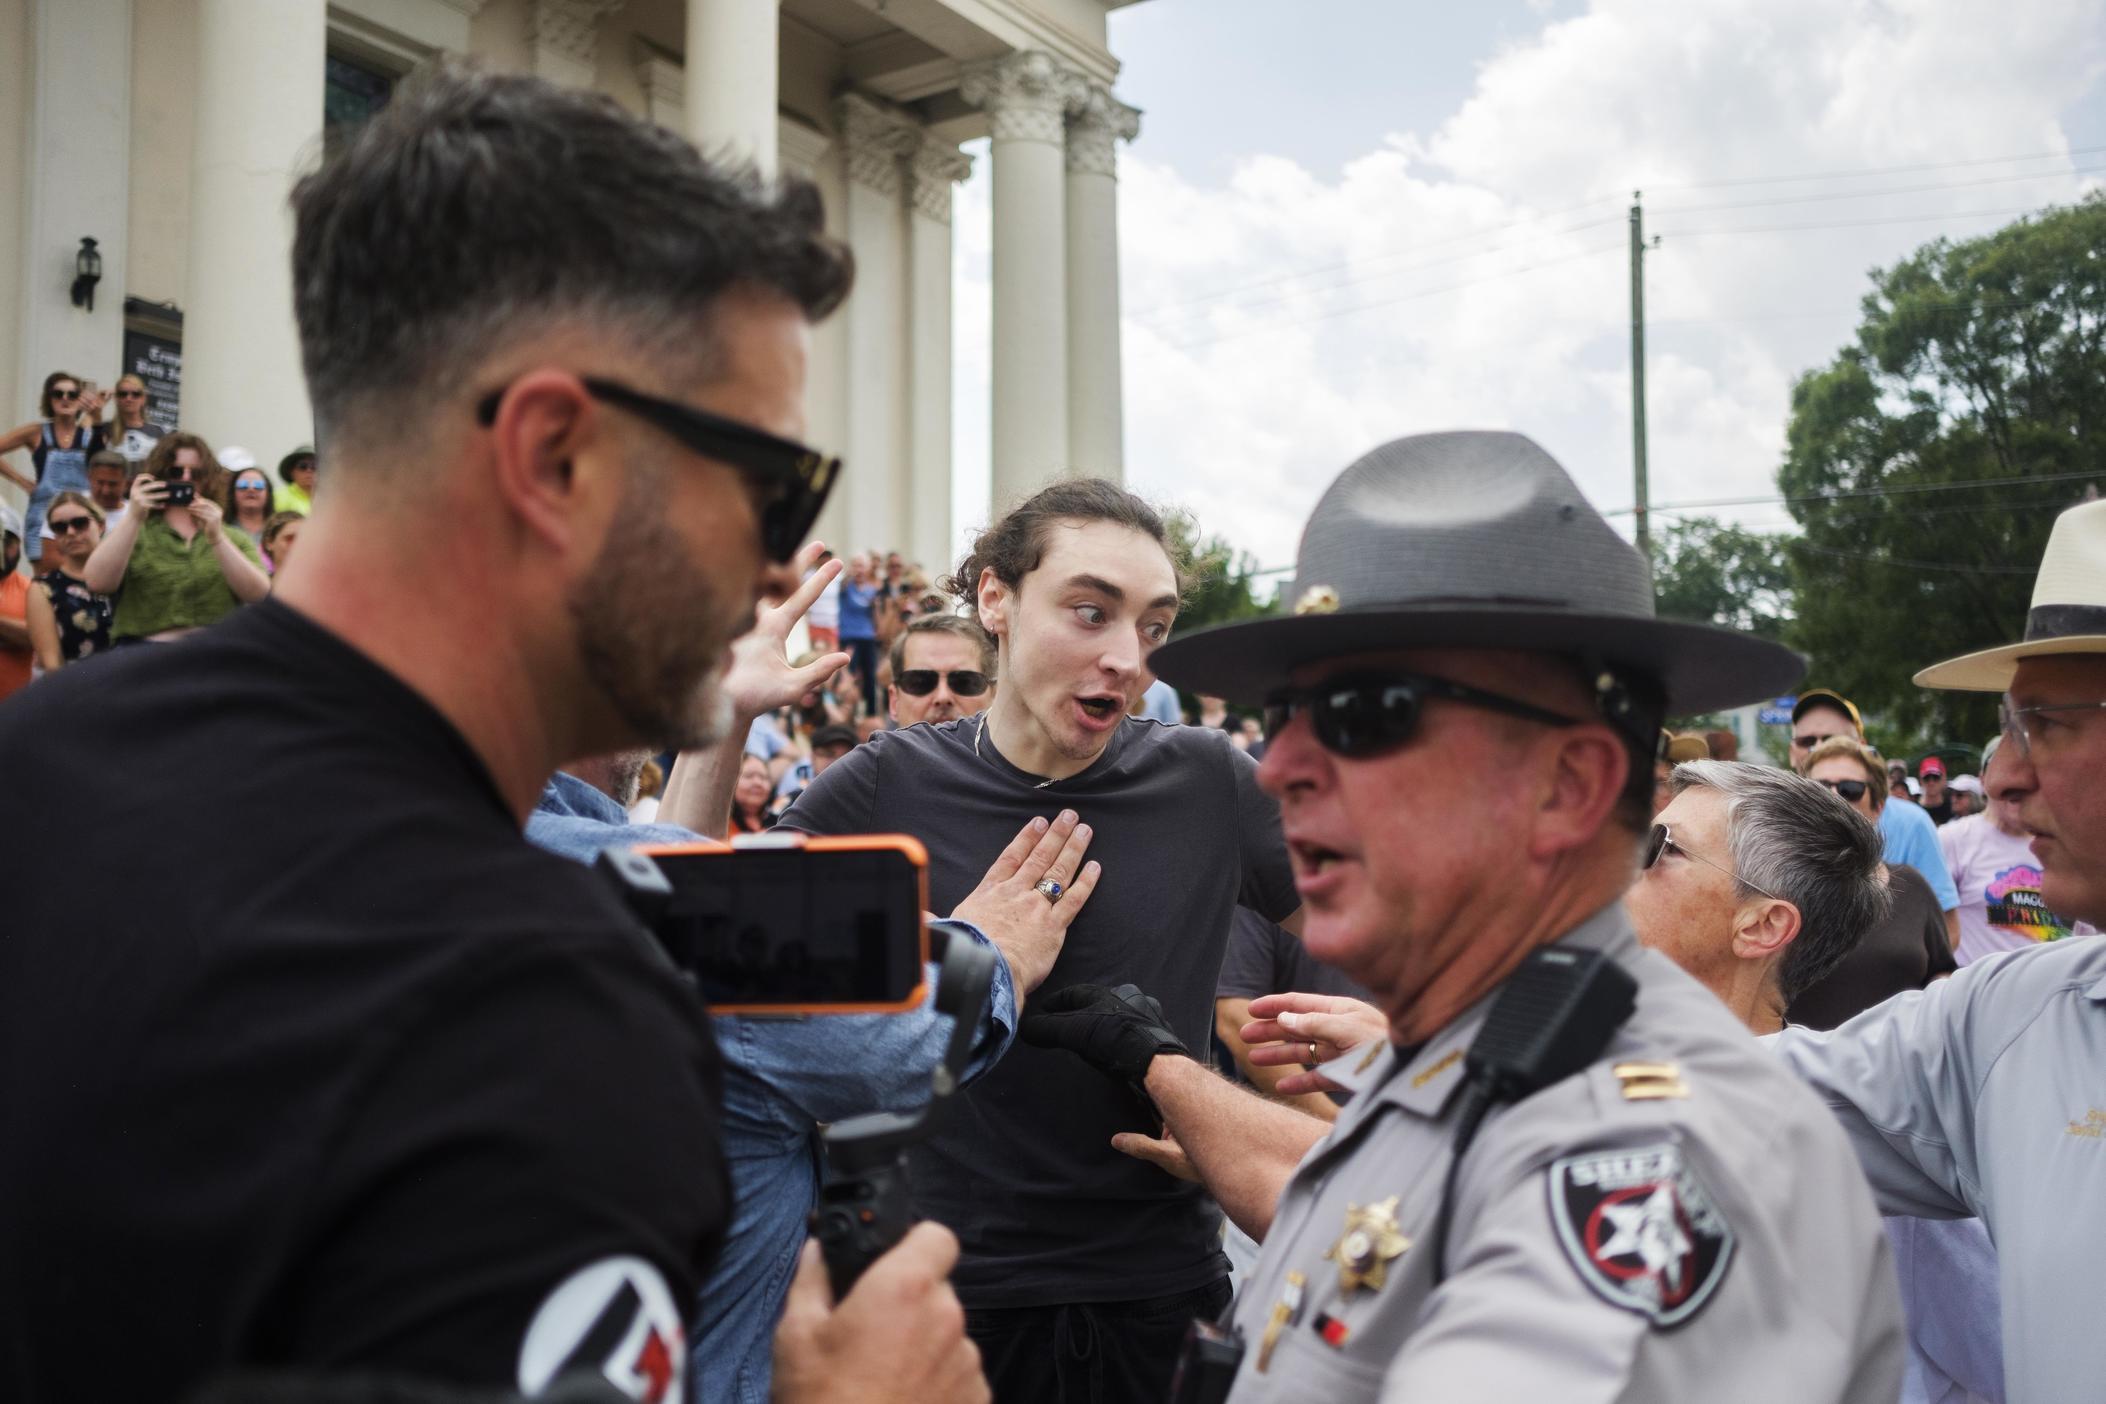 A supporter of Macon's Temple Beth Israel, center, is held back by law enforcement as the leader of a documented antisemitic hate group, left, attempts to disrupt a gathering at the temple on Saturday, June 24. The gathering was in response to the hate group's action at the temple the day before at the start of the Jewish Sabbath.